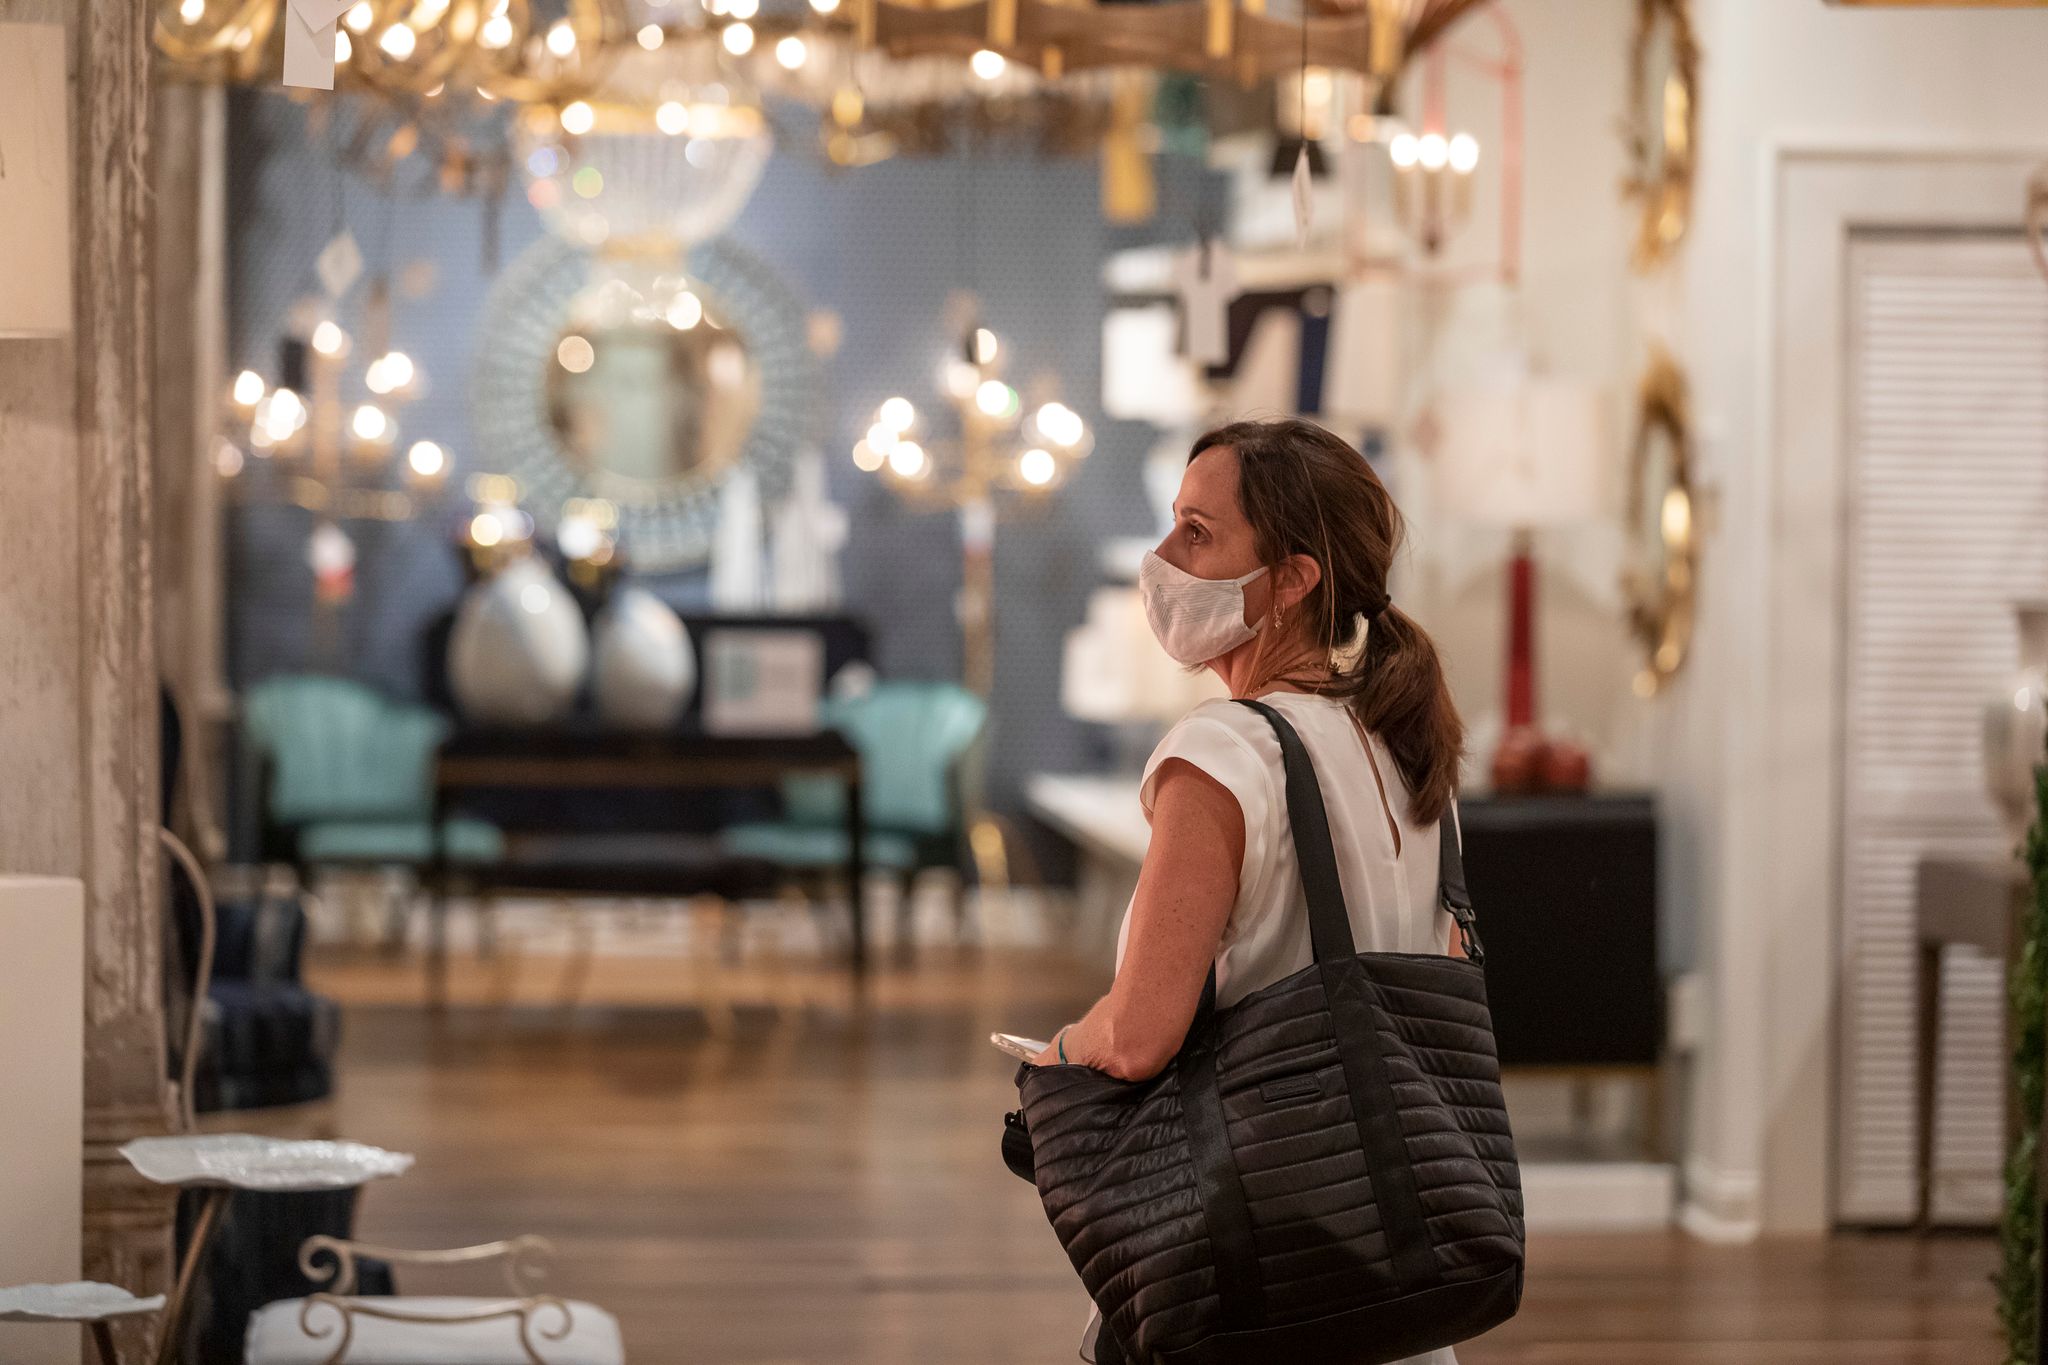 A woman stands in a furniture showroom looking at various objects. She is carrying a large bag and wearing a cloth mask.